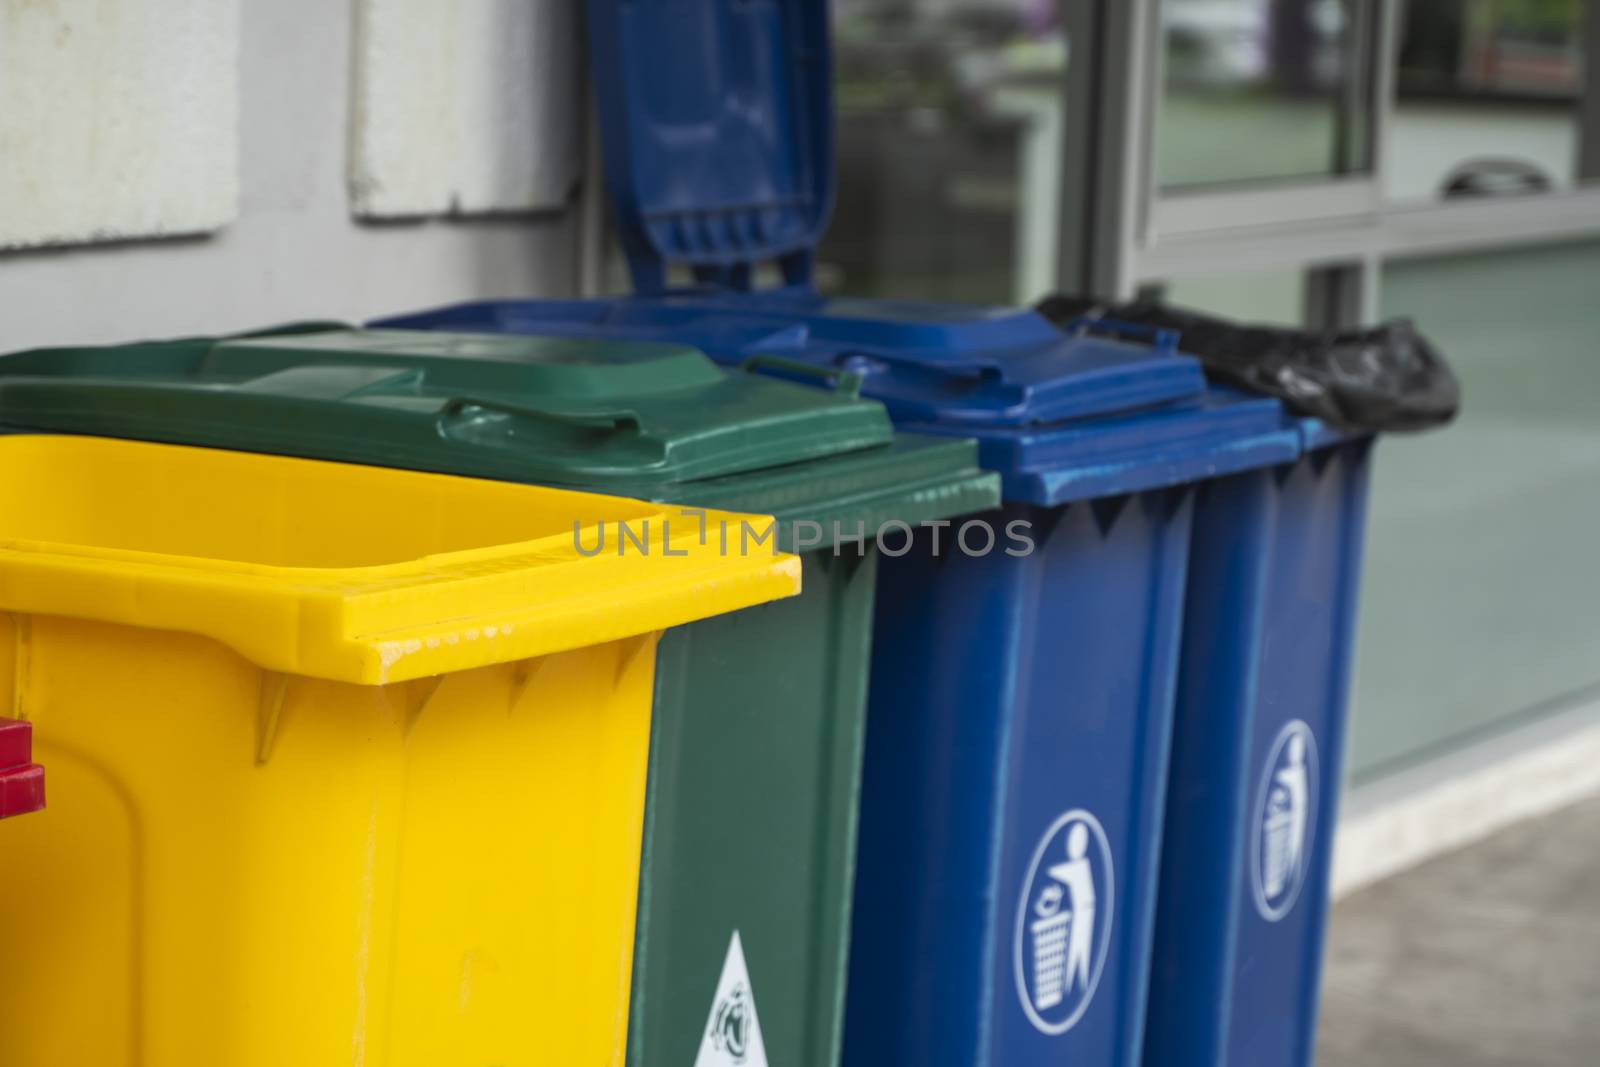 Garbage Trash Bins for collecting a recycle materials. Garbage trash bins for waste segregation. Separate waste collection food waste, plastic, paper and danger waste. Recycling. Environment